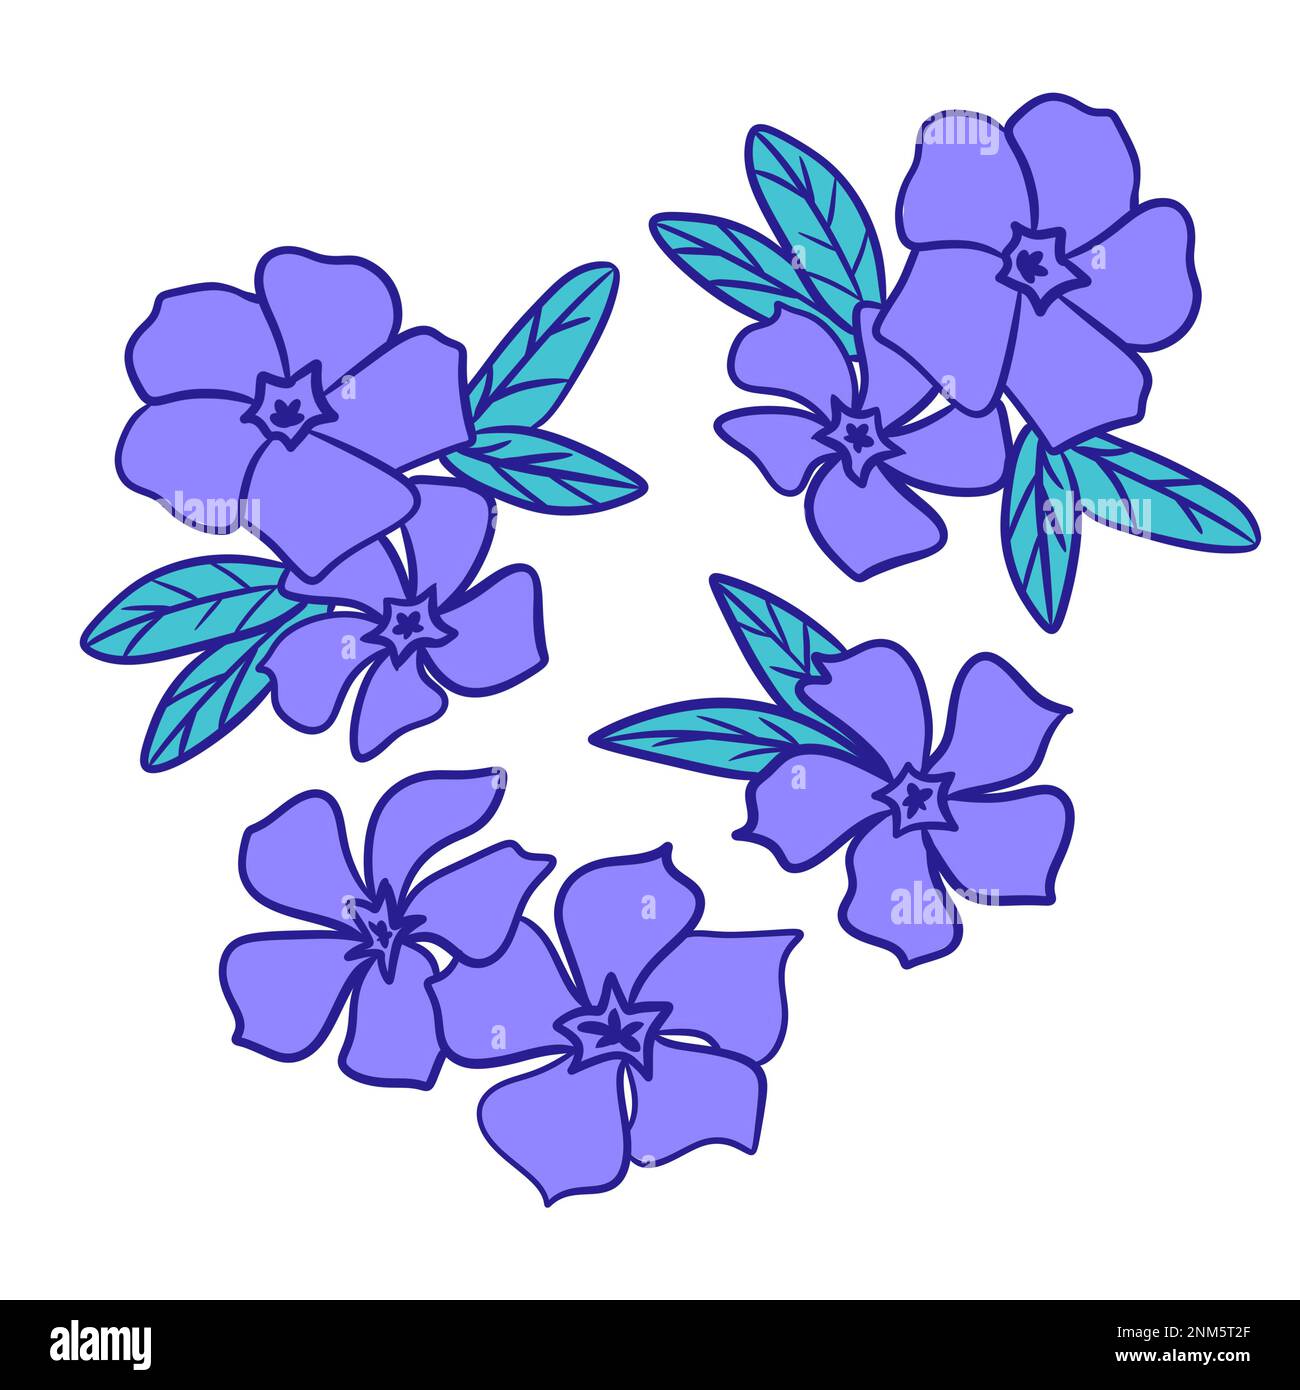 Hand drawn illustration of periwinkle blue violet flowers with green leaves. Natural wild forest flowers in floral decorative style, wood woodland nature plant, bloom blossom drawing leaf foliage Stock Photo